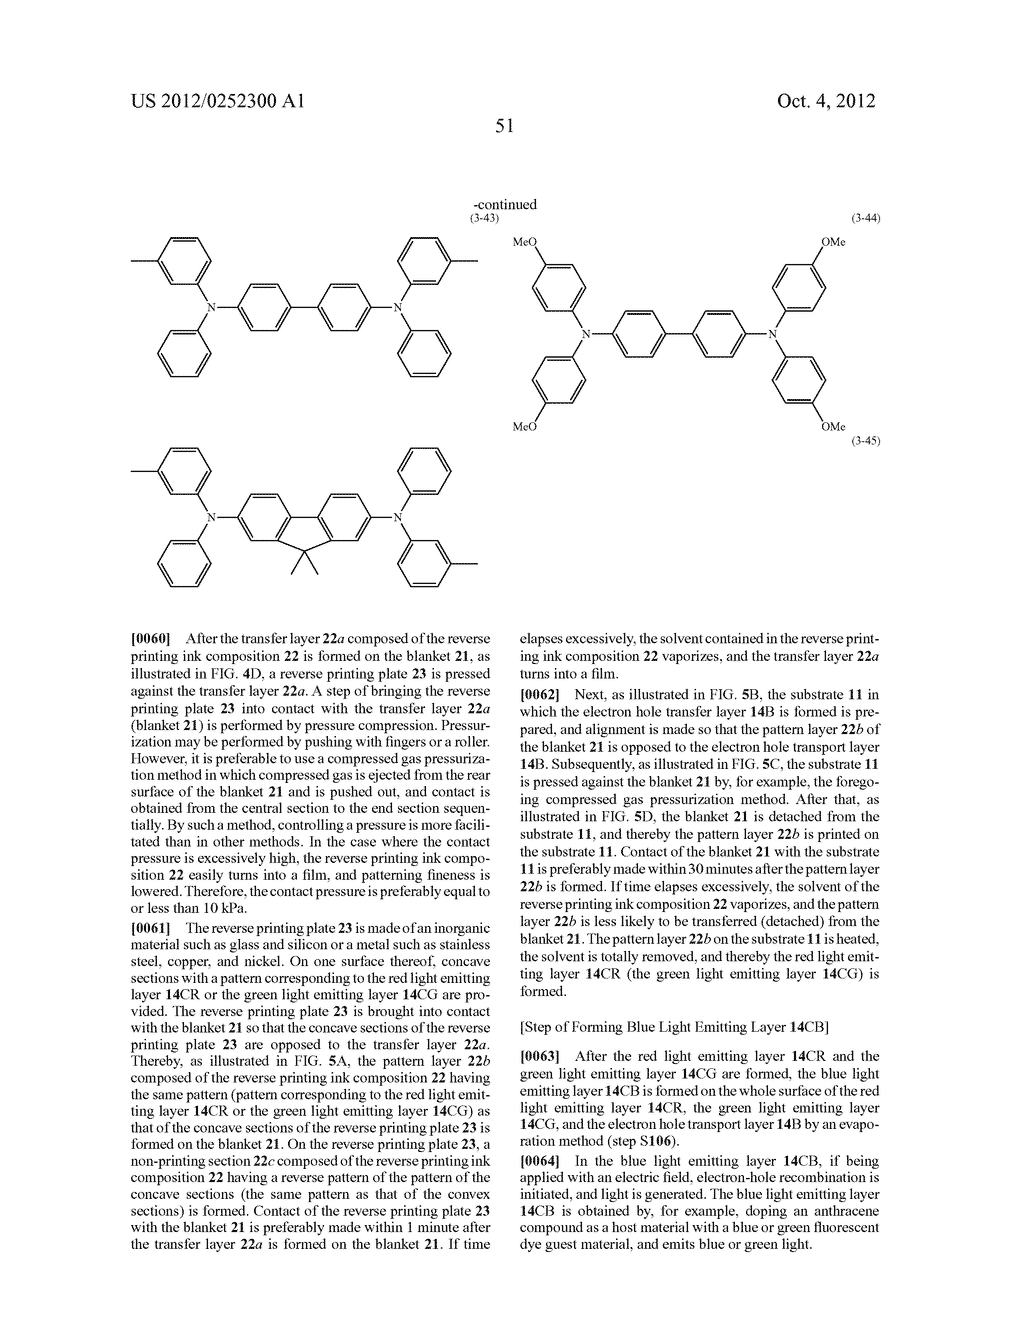 REVERSE PRINTING INK COMPOSITION, PRINTING METHOD USING THE SAME, METHOD     OF MANUFACTURING DISPLAY UNIT USING THE SAME - diagram, schematic, and image 60